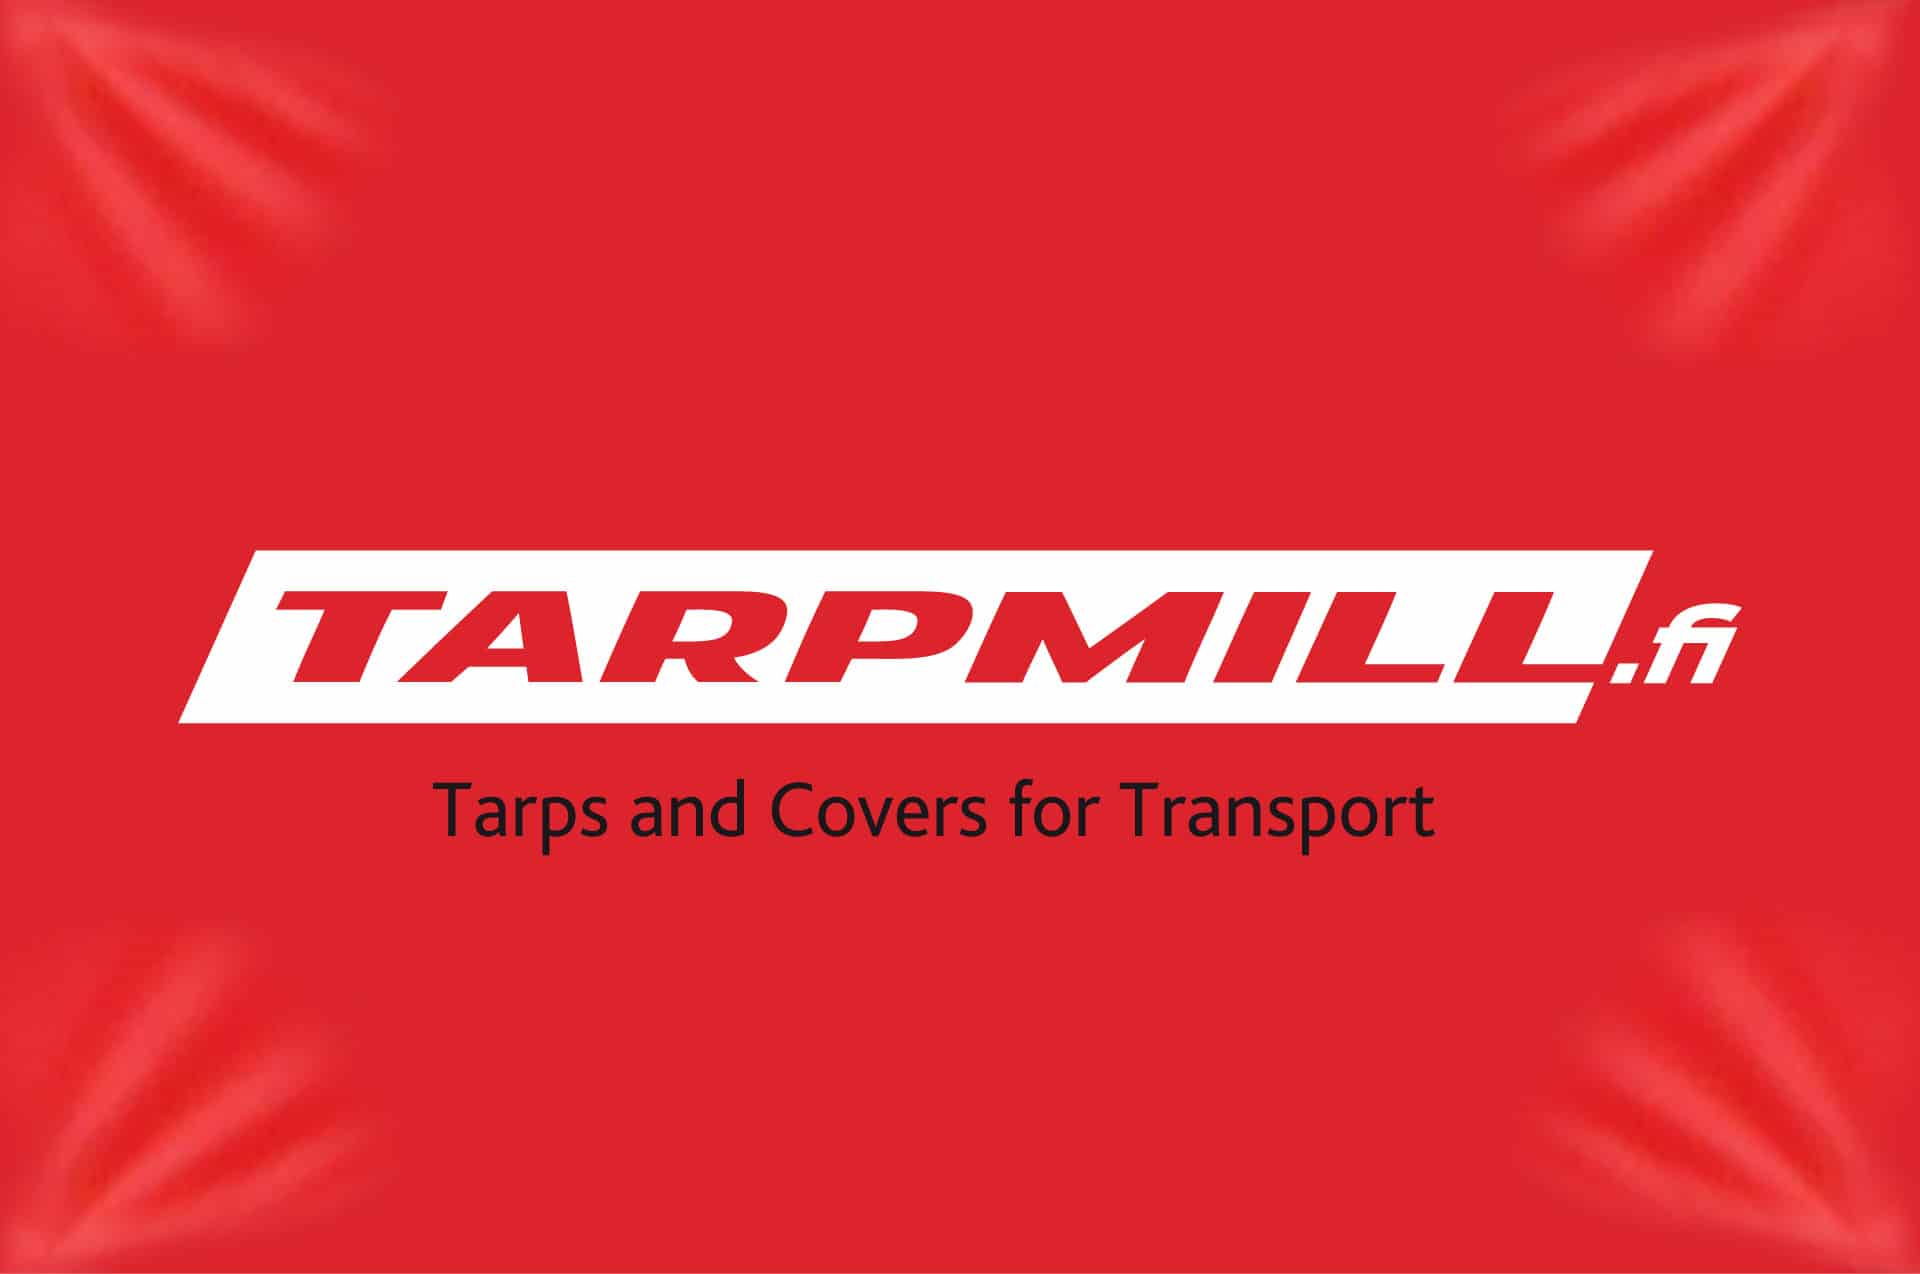 brand_design_for_producer_of_tarps_and_cargo_covers